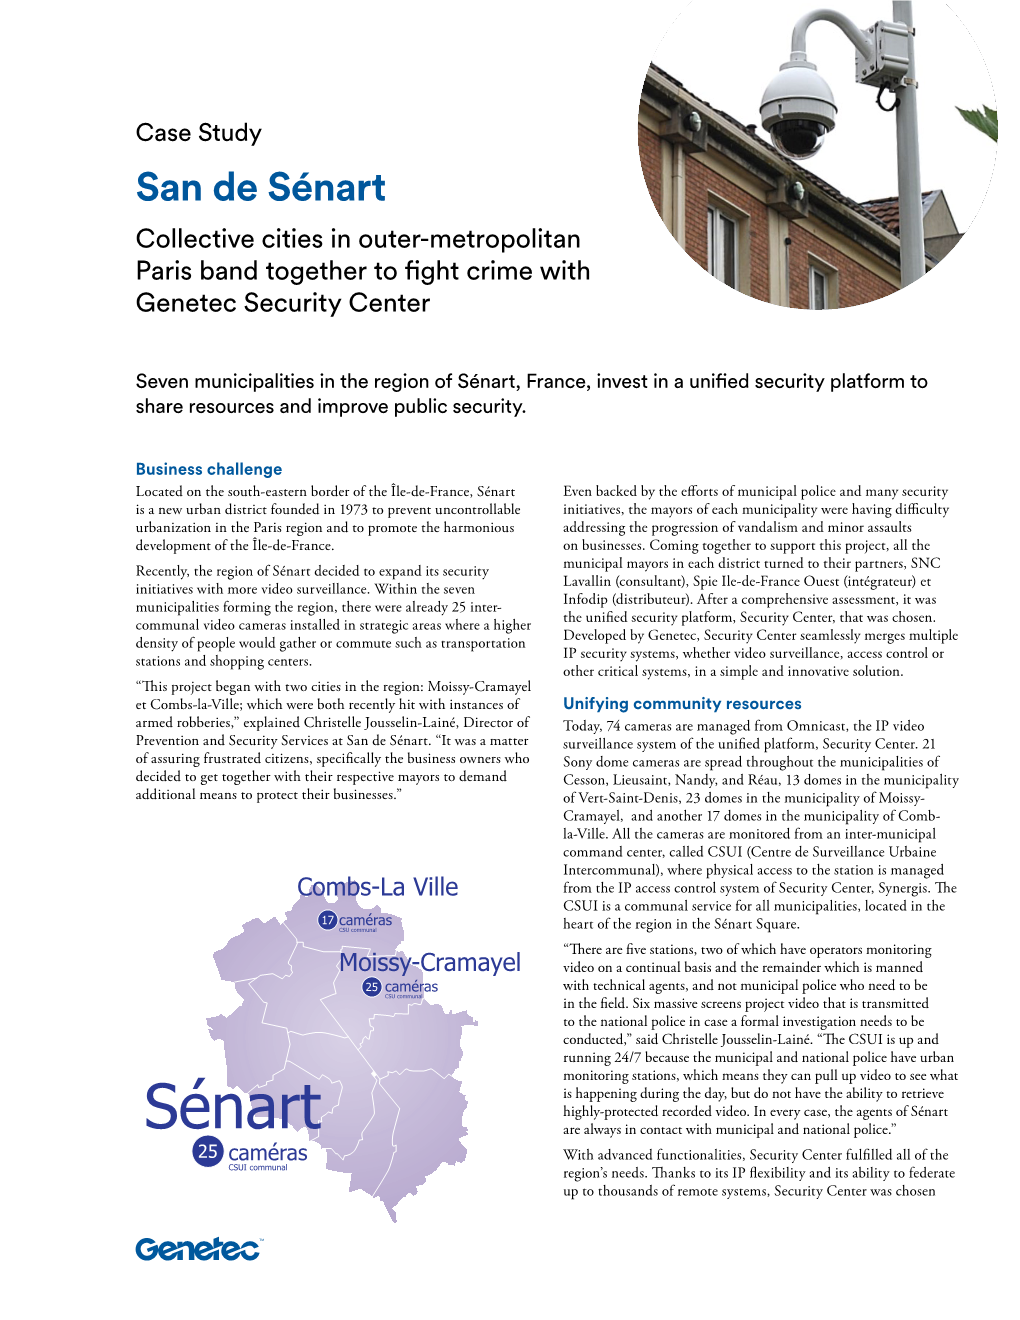 Sénart Collective Cities in Outer-Metropolitan Paris Band Together to Fight Crime with Genetec Security Center